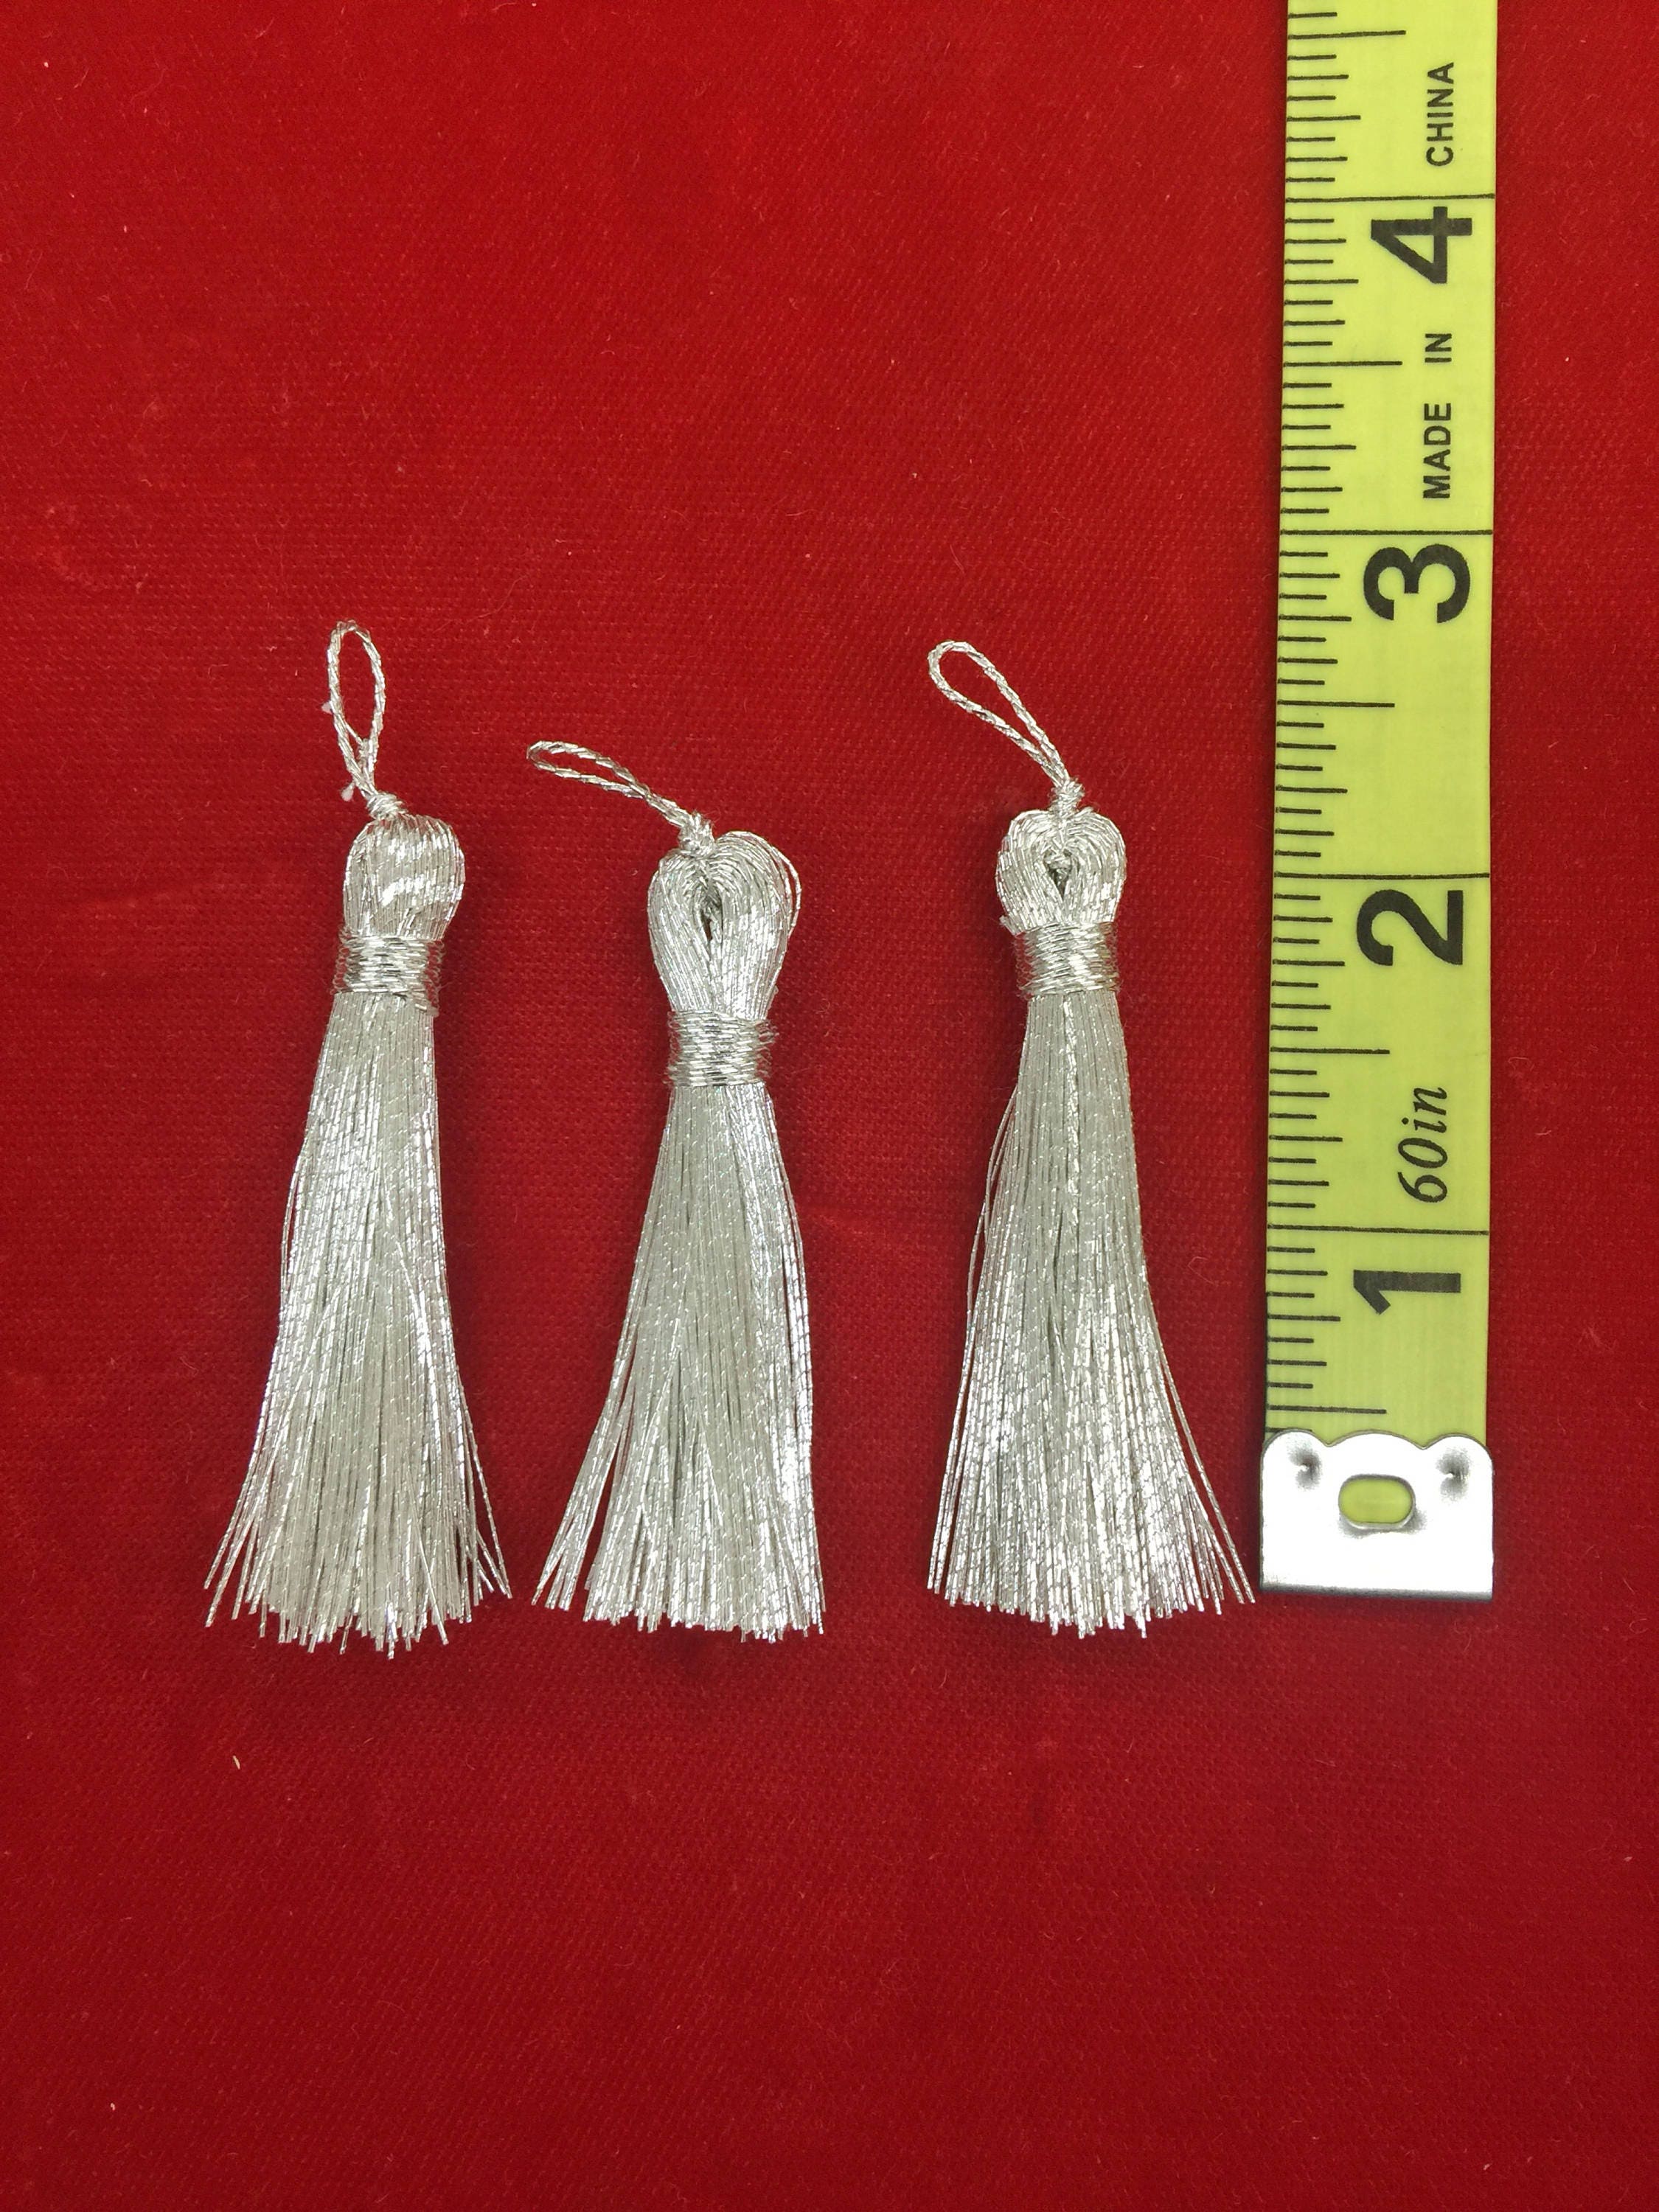 Imported Tassels, M. Ford Creech Antiques